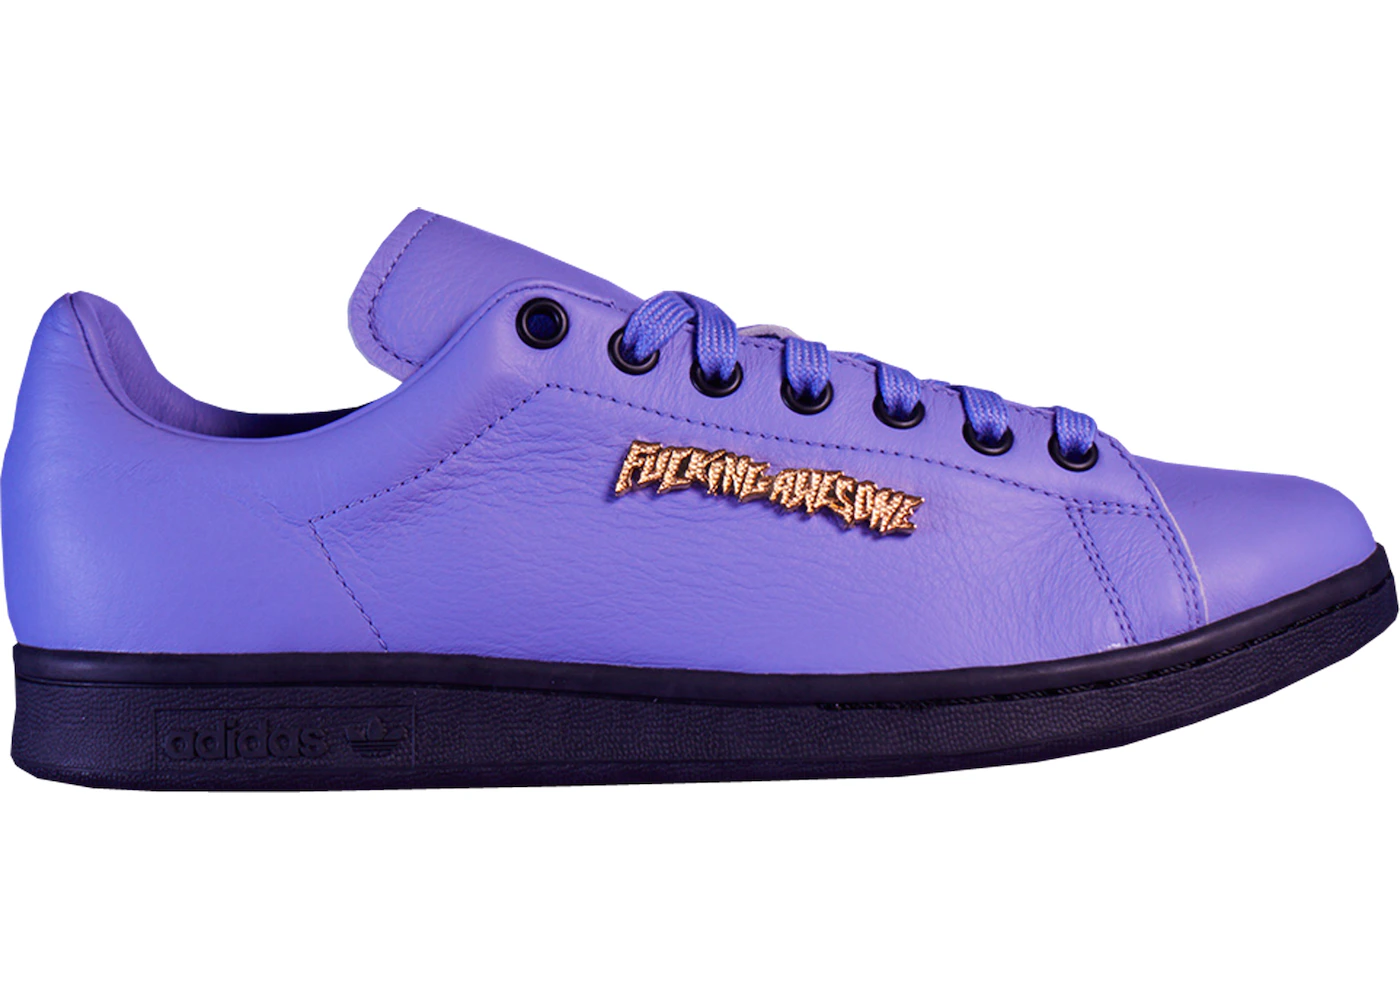 adidas Stan Smith Fucking Awesome Purple Men's - Sneakers - US